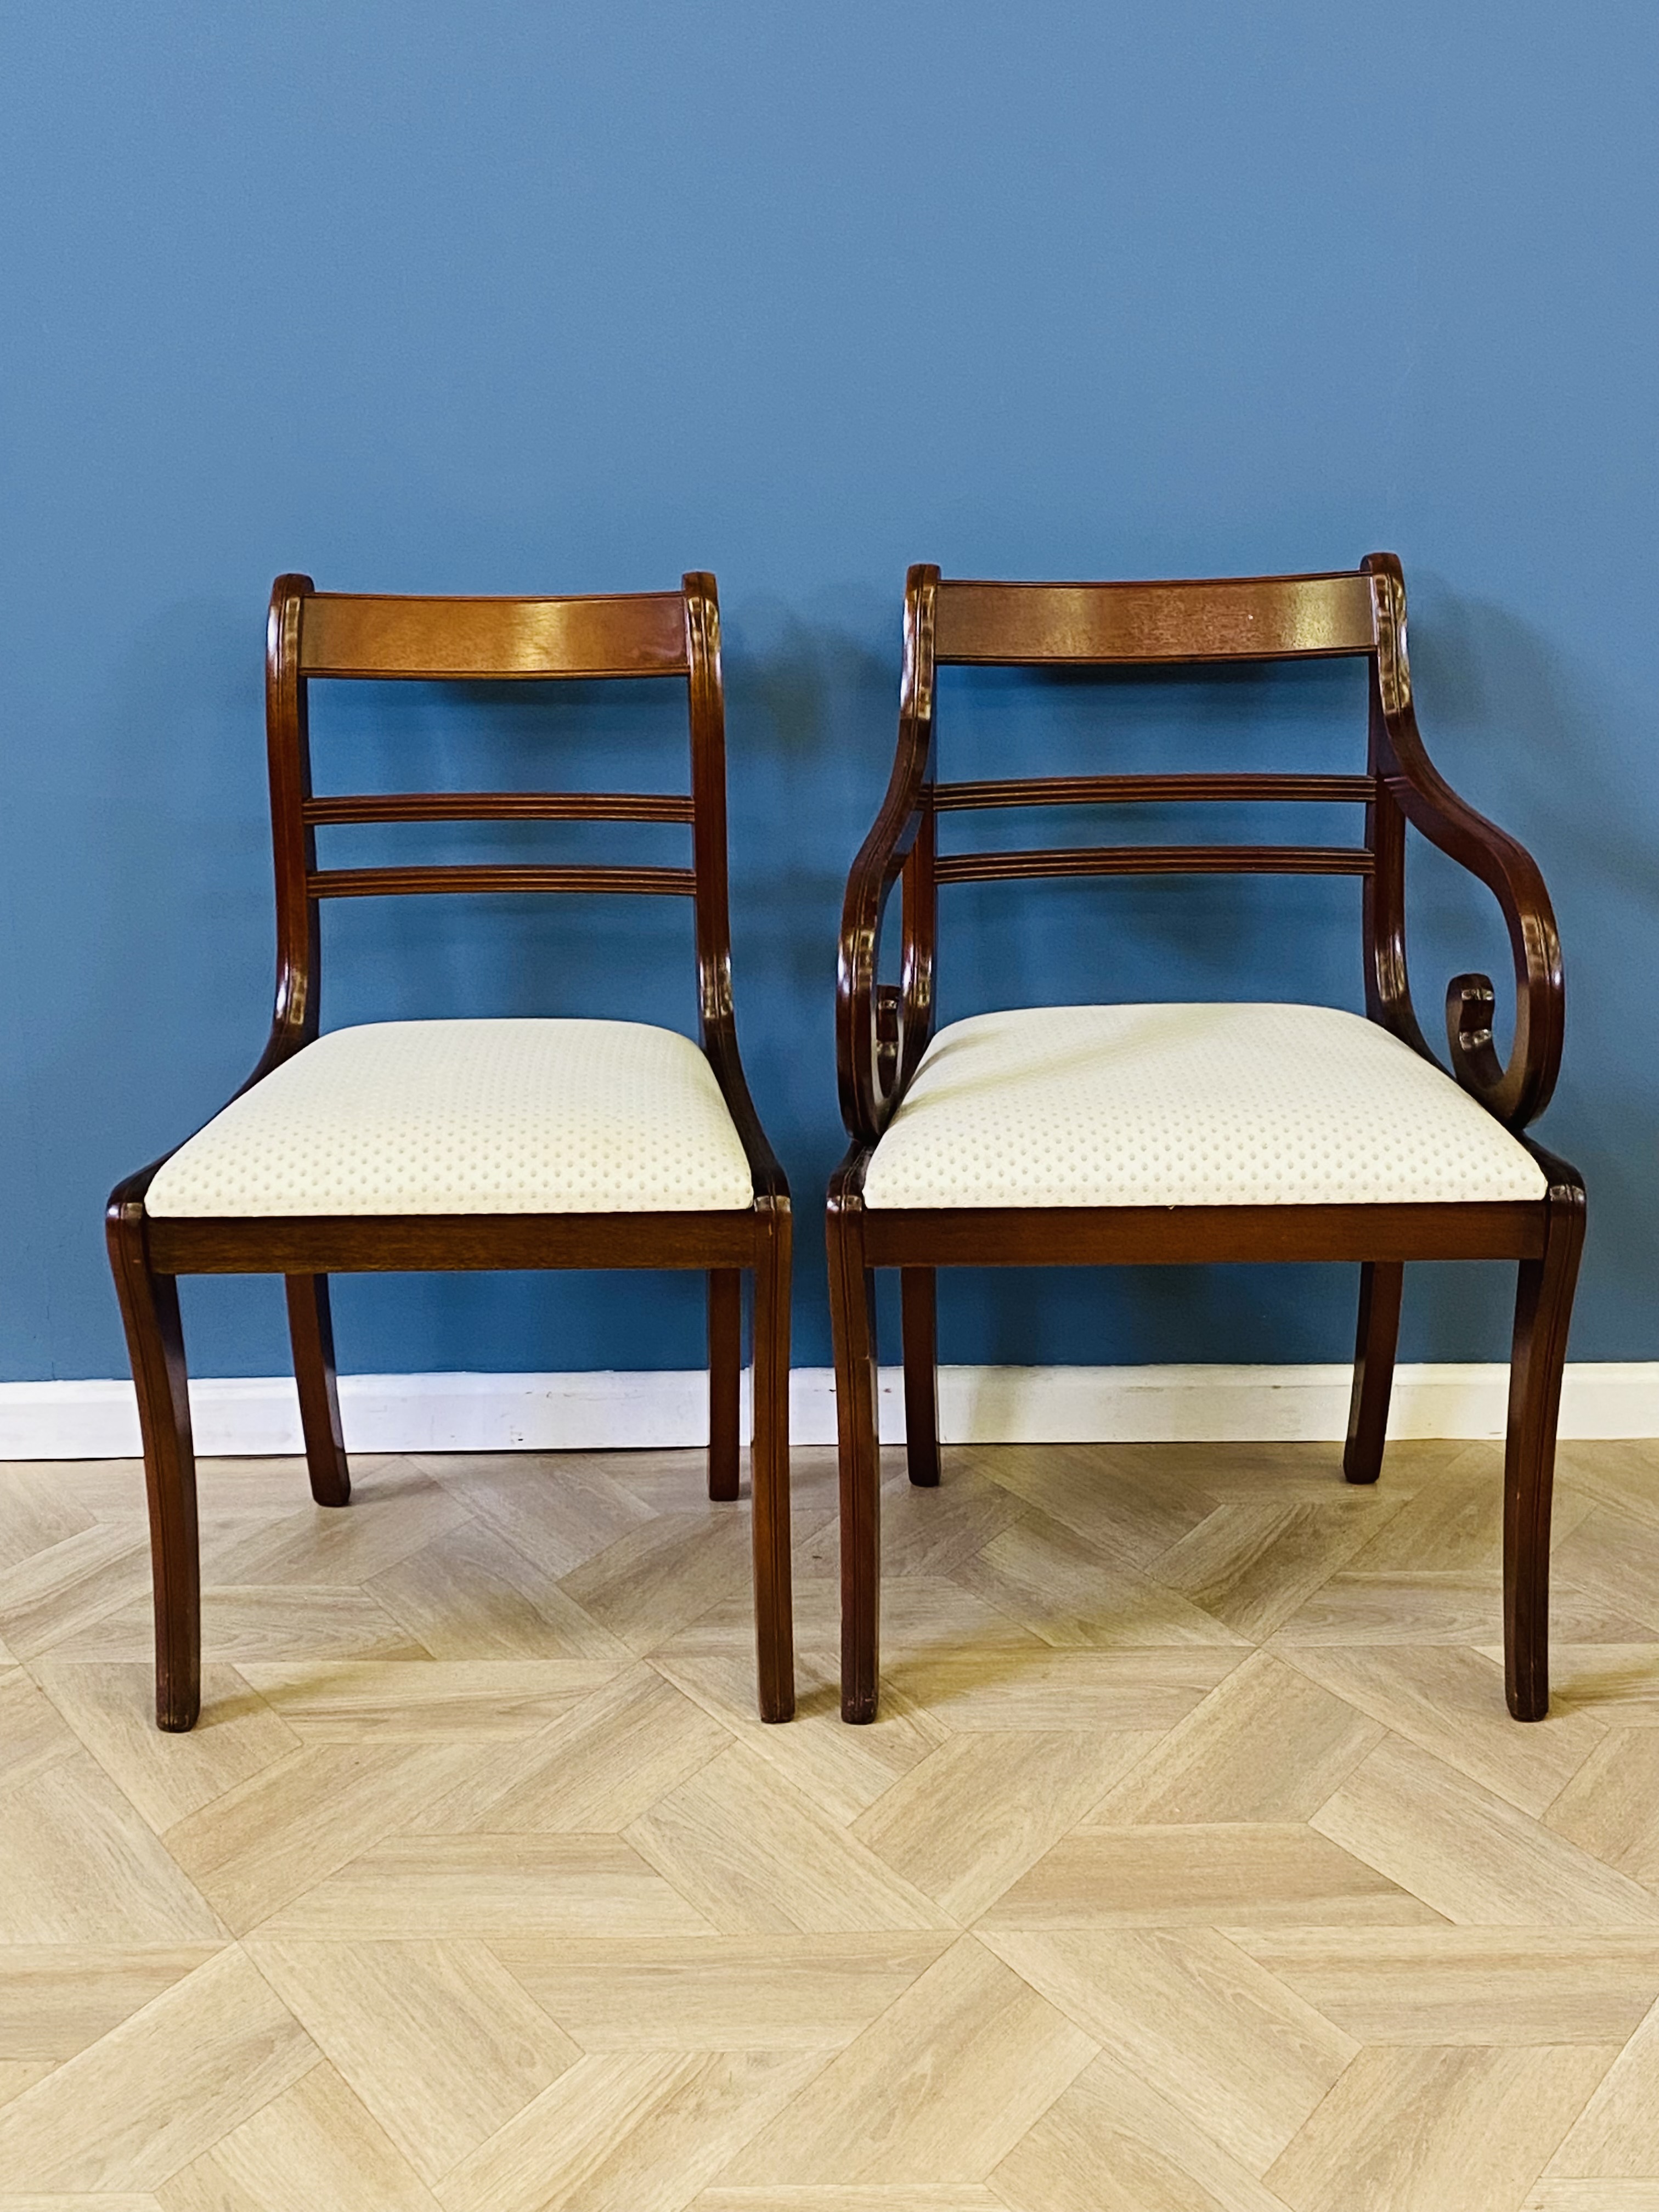 Set of six mahogany Regency style dining chairs - Image 5 of 7